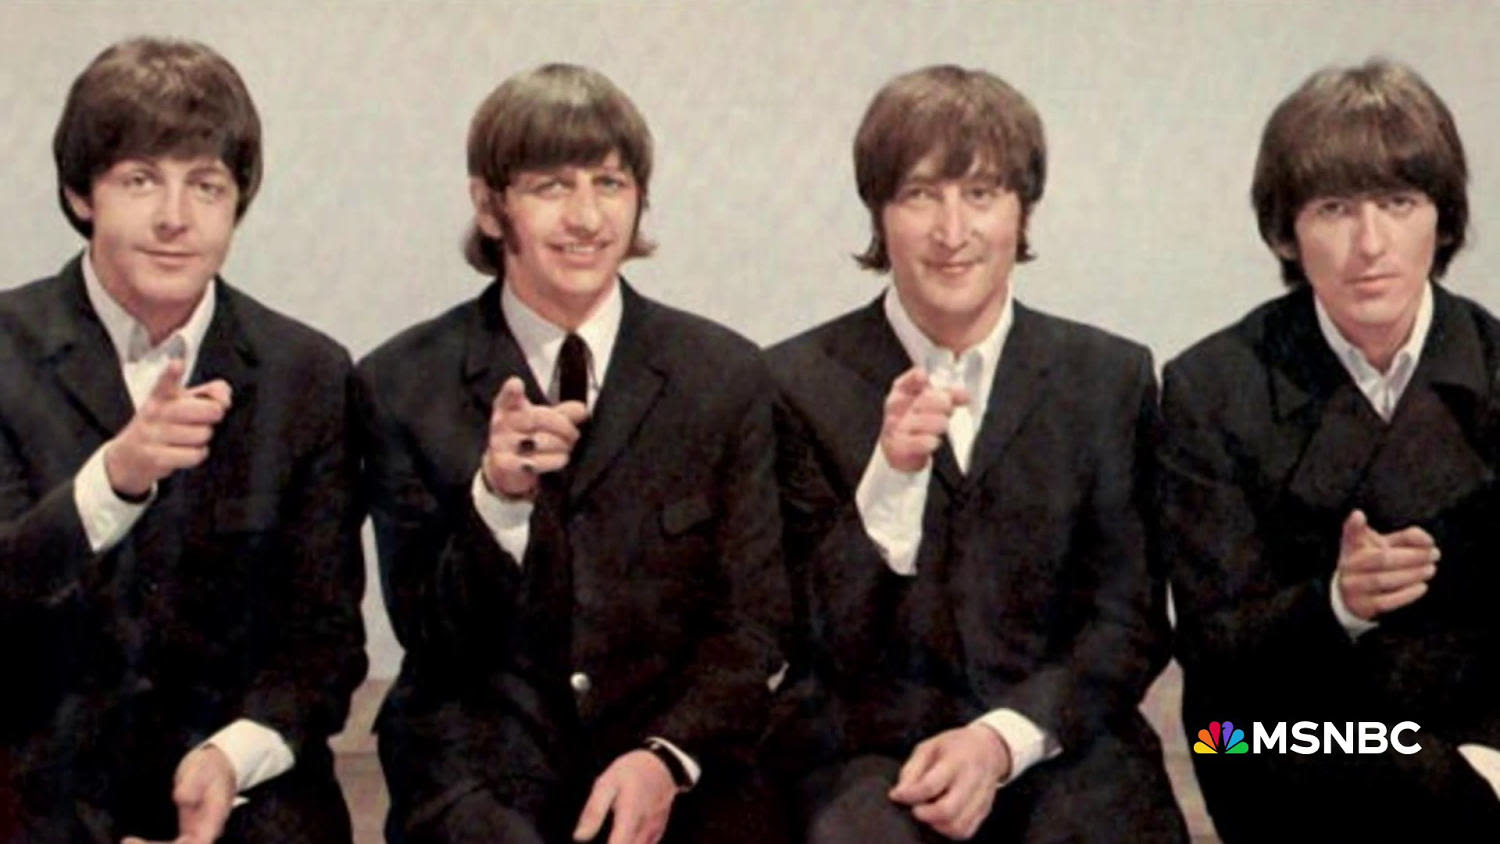 How The Beatles inspired a new book on becoming famous